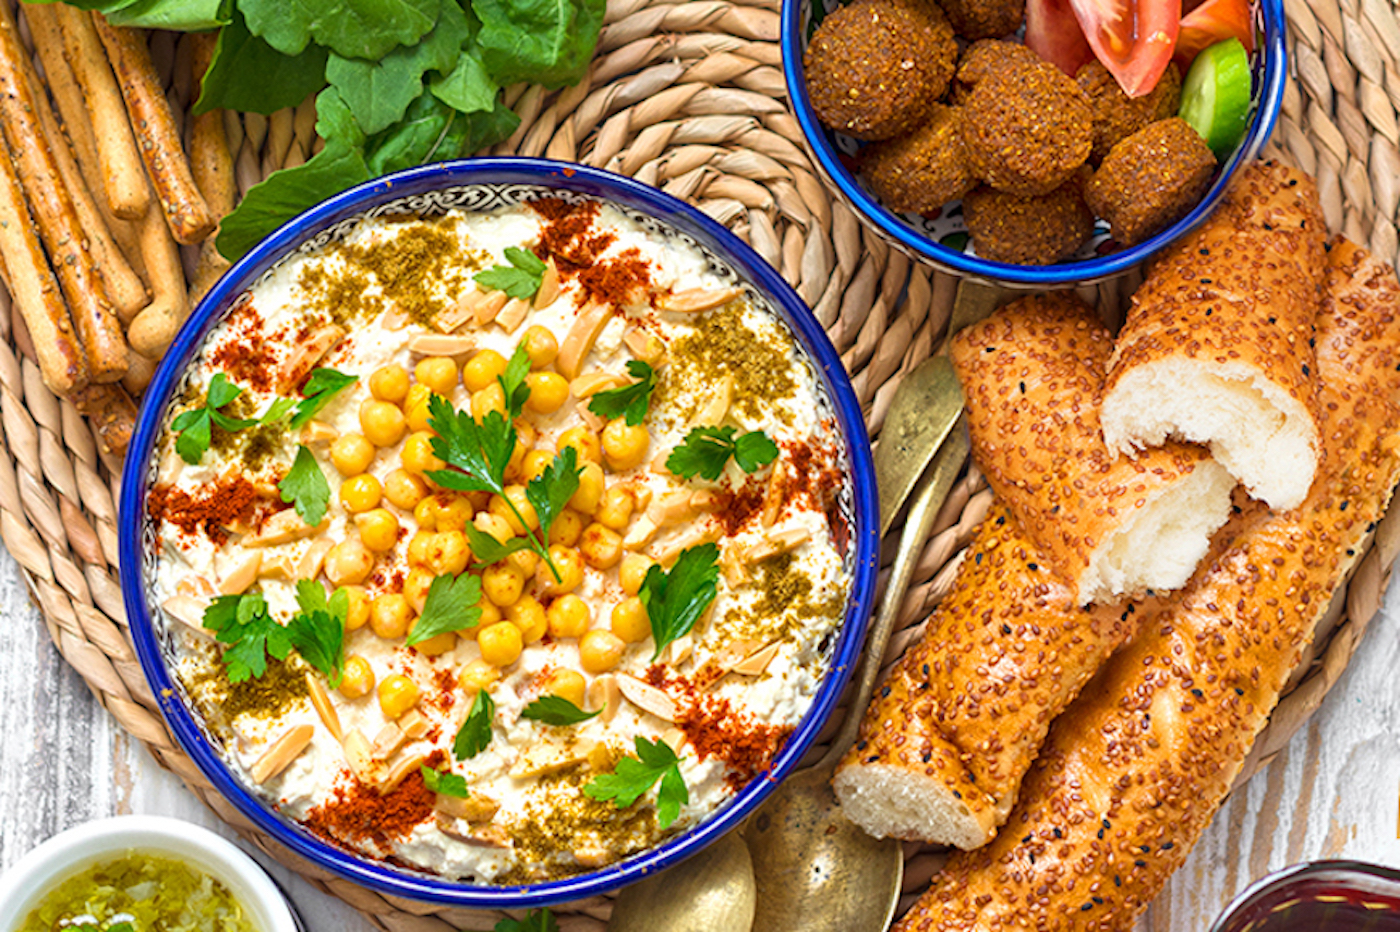 Vegetarian Middle Eastern Food Recipes Full of Protein